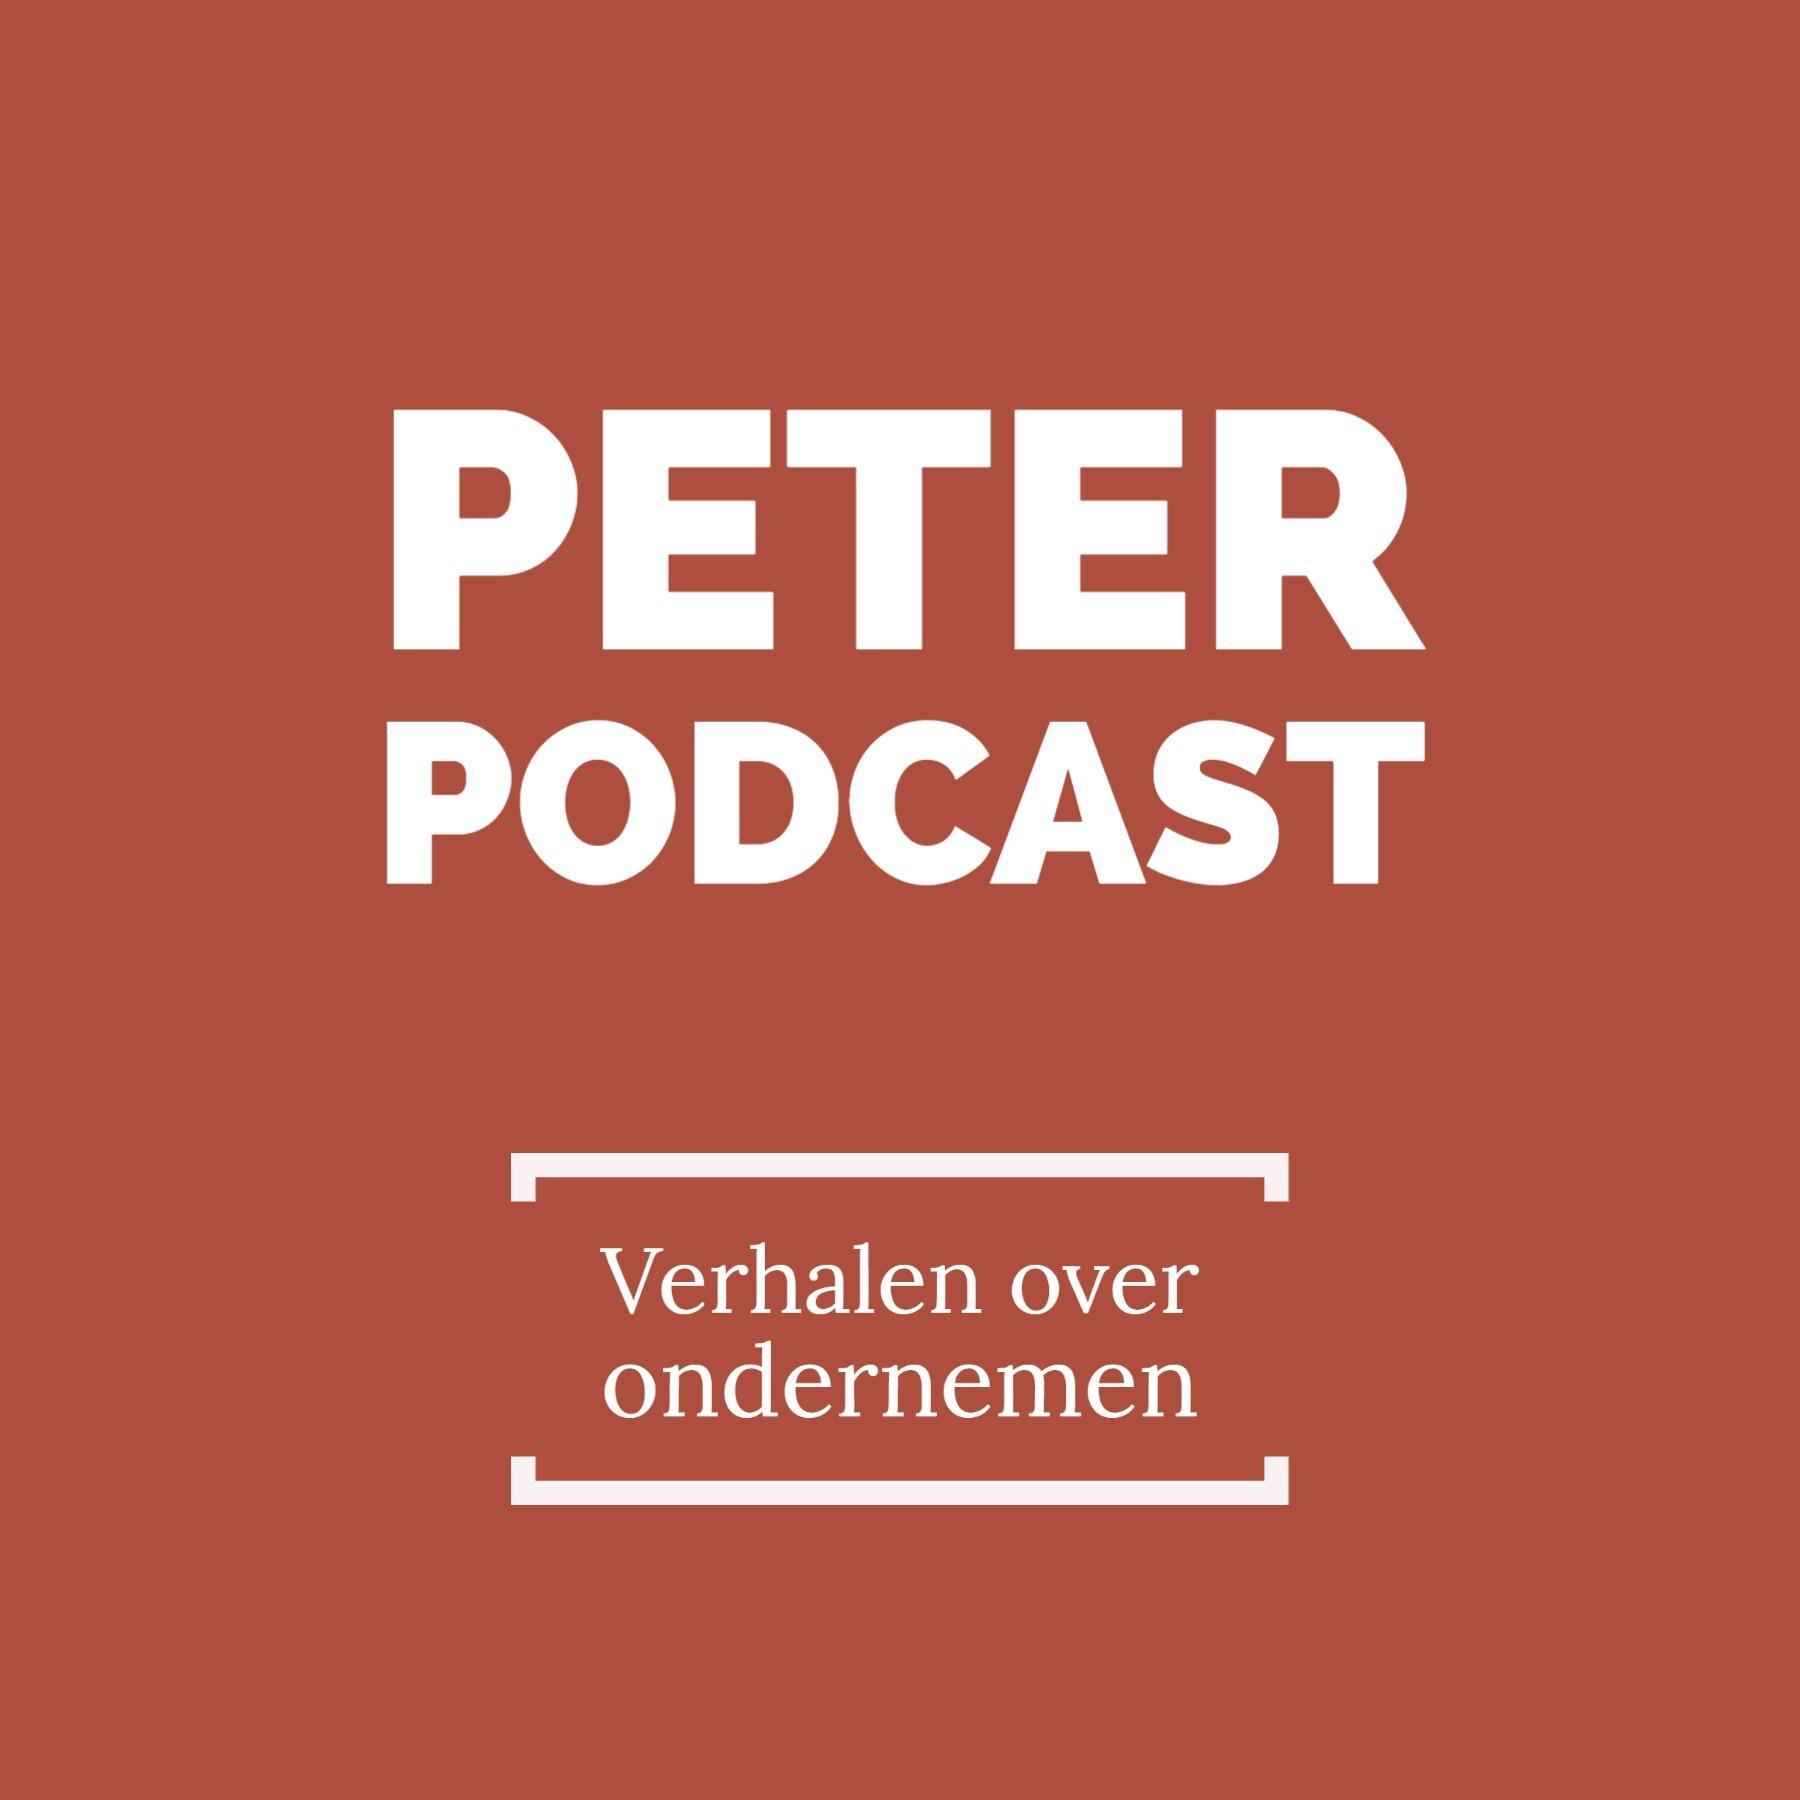 Peter Podcast